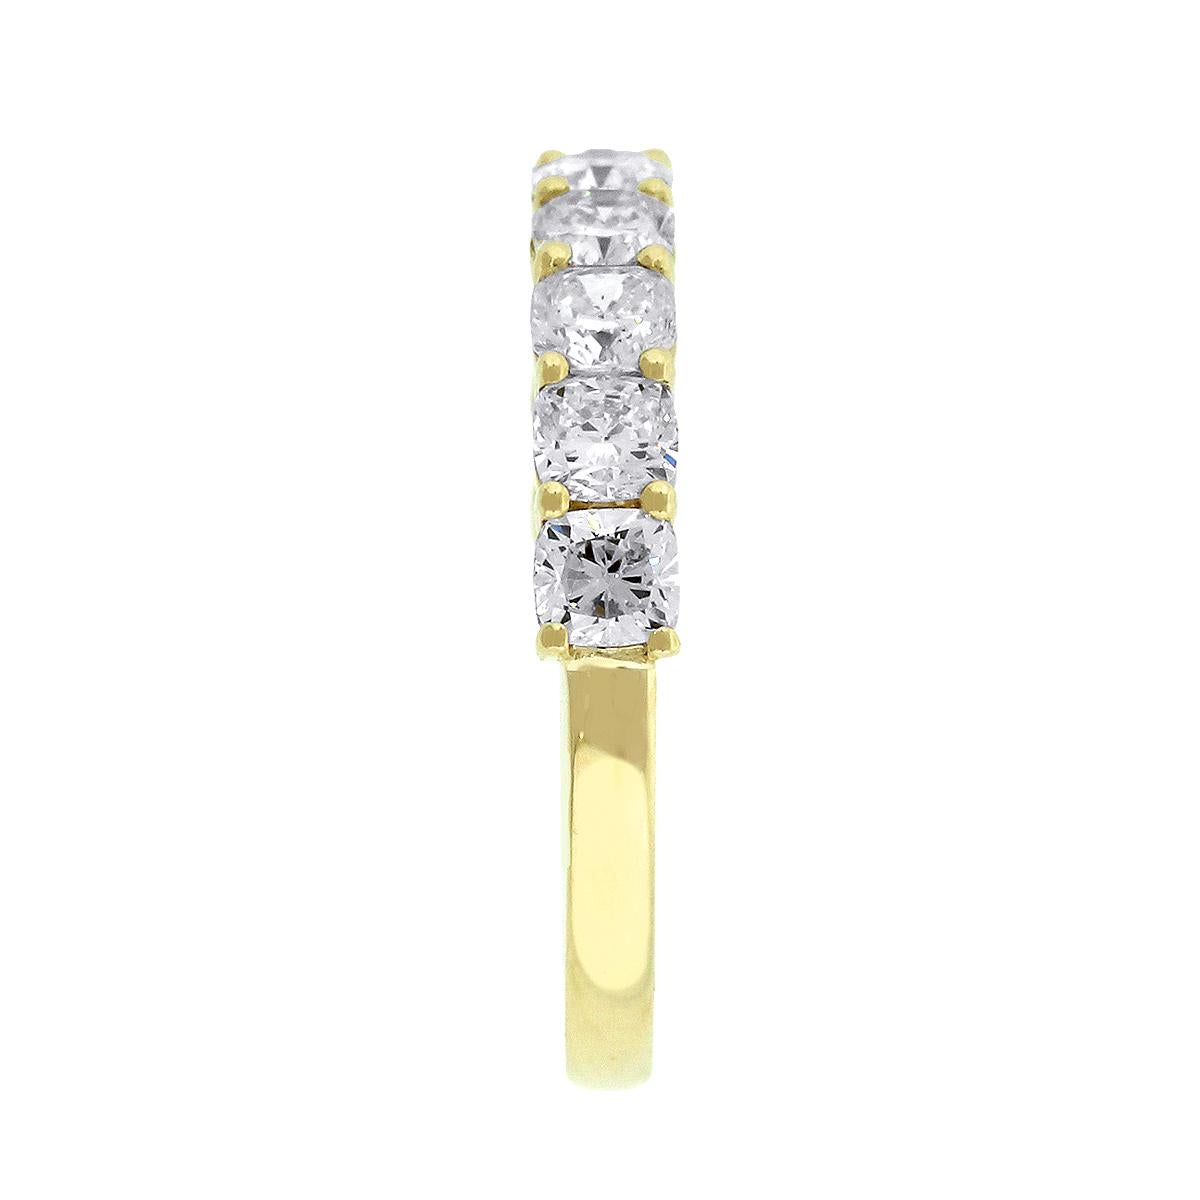 Material: 14k Yellow Gold
Diamond Details: Approximately 1.61ctw of Cushion Cut Diamonds. Diamonds are G/H in color and VS in clarity
Size: 6.25
Total Weight: 2.8g (1.8 dwt)
Measurements: 0.85″ x 0.12″ x 0.80″
SKU: A30311879